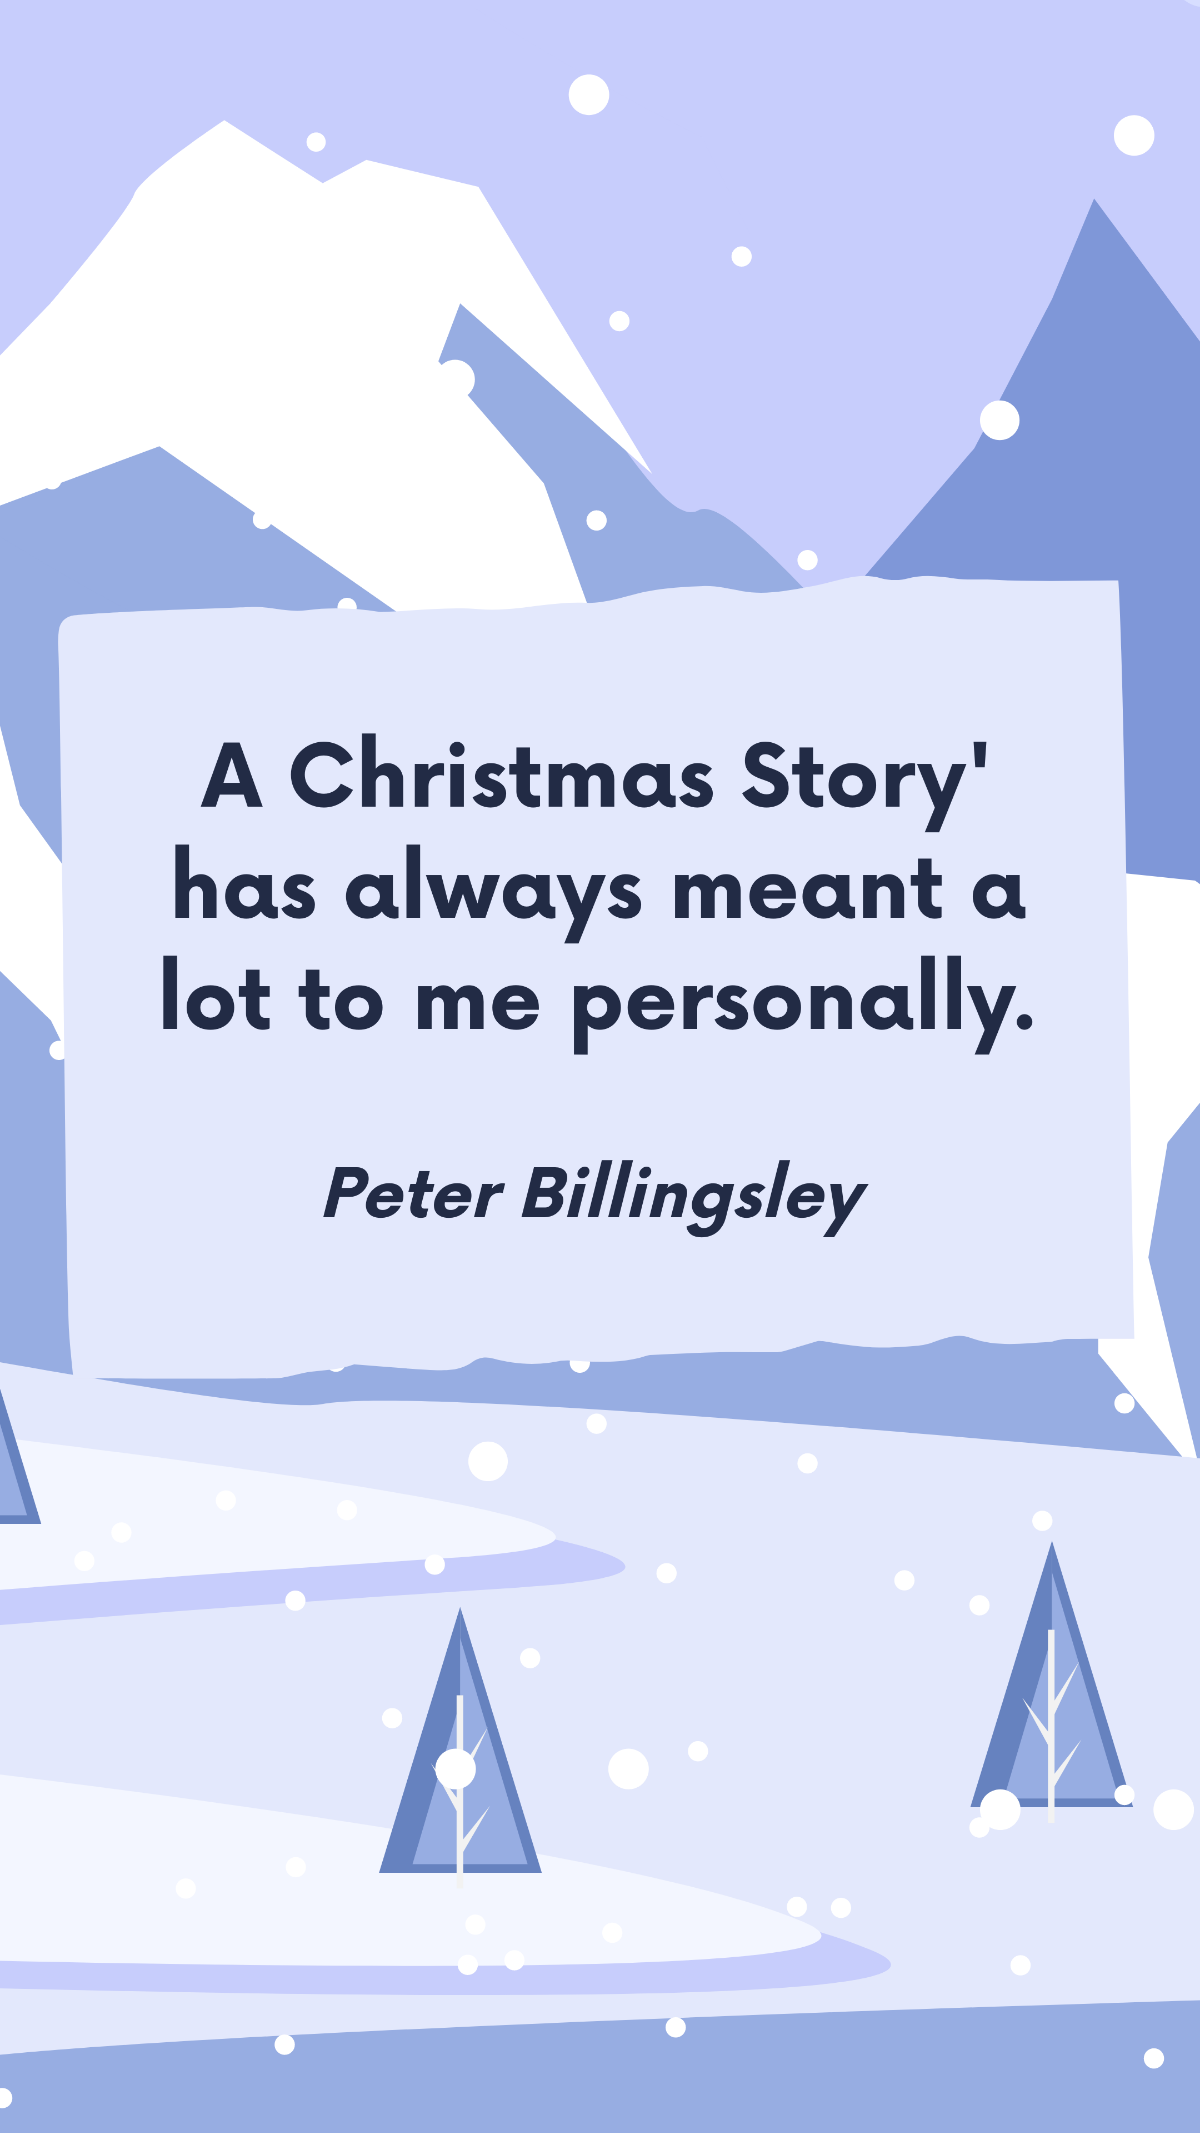 Peter Billingsley - A Christmas Story' has always meant a lot to me personally. Template